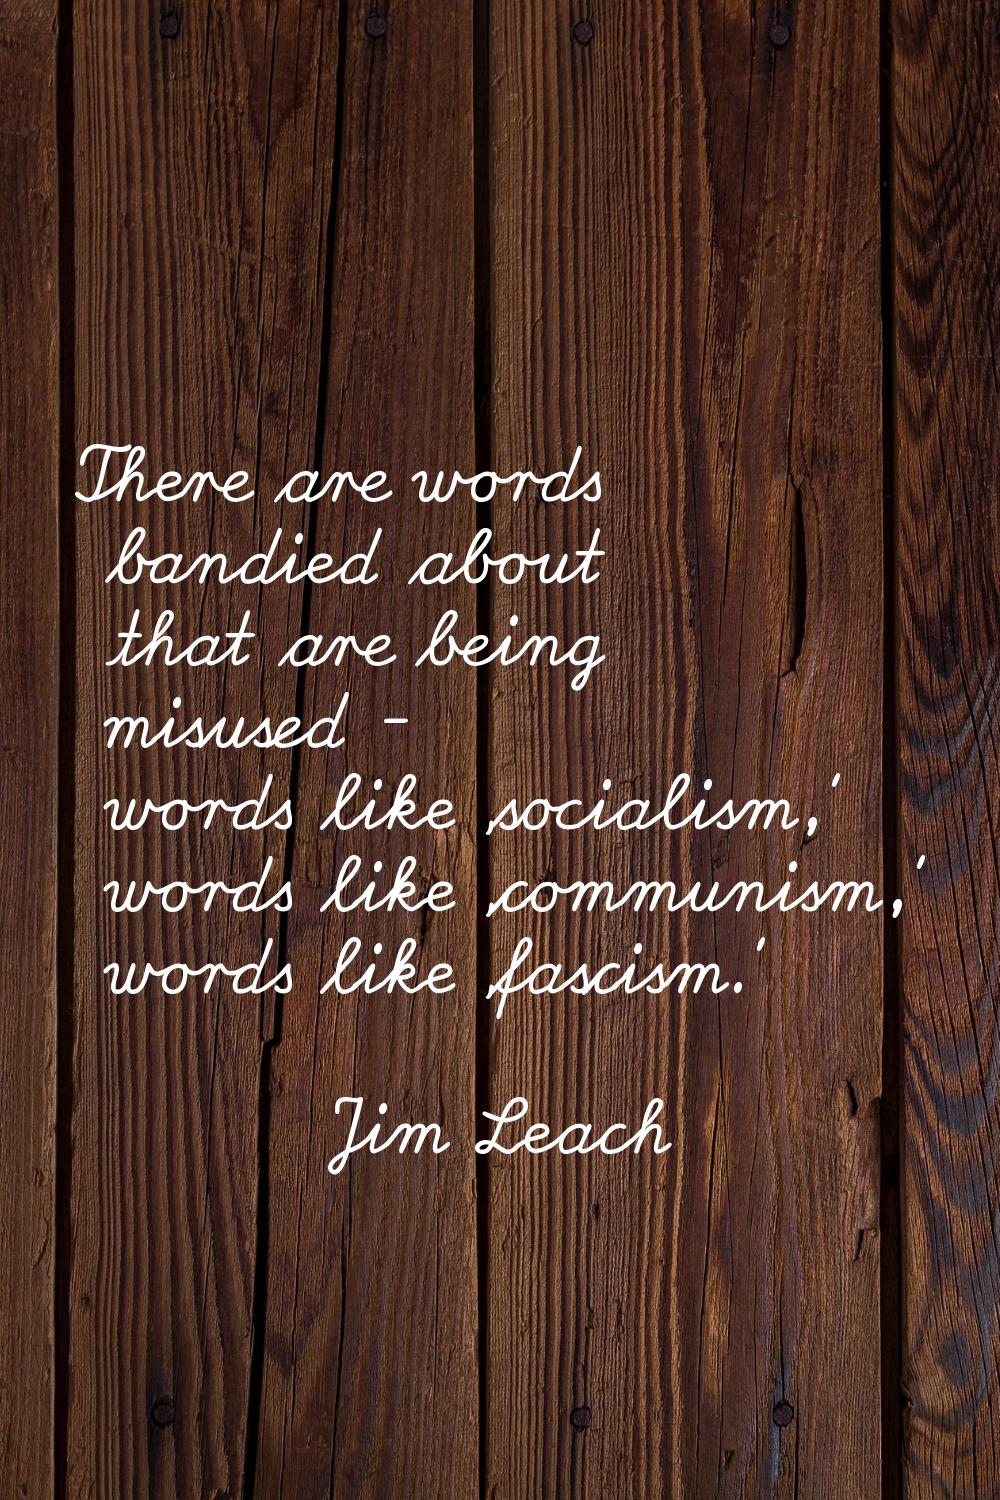 There are words bandied about that are being misused - words like 'socialism,' words like 'communis